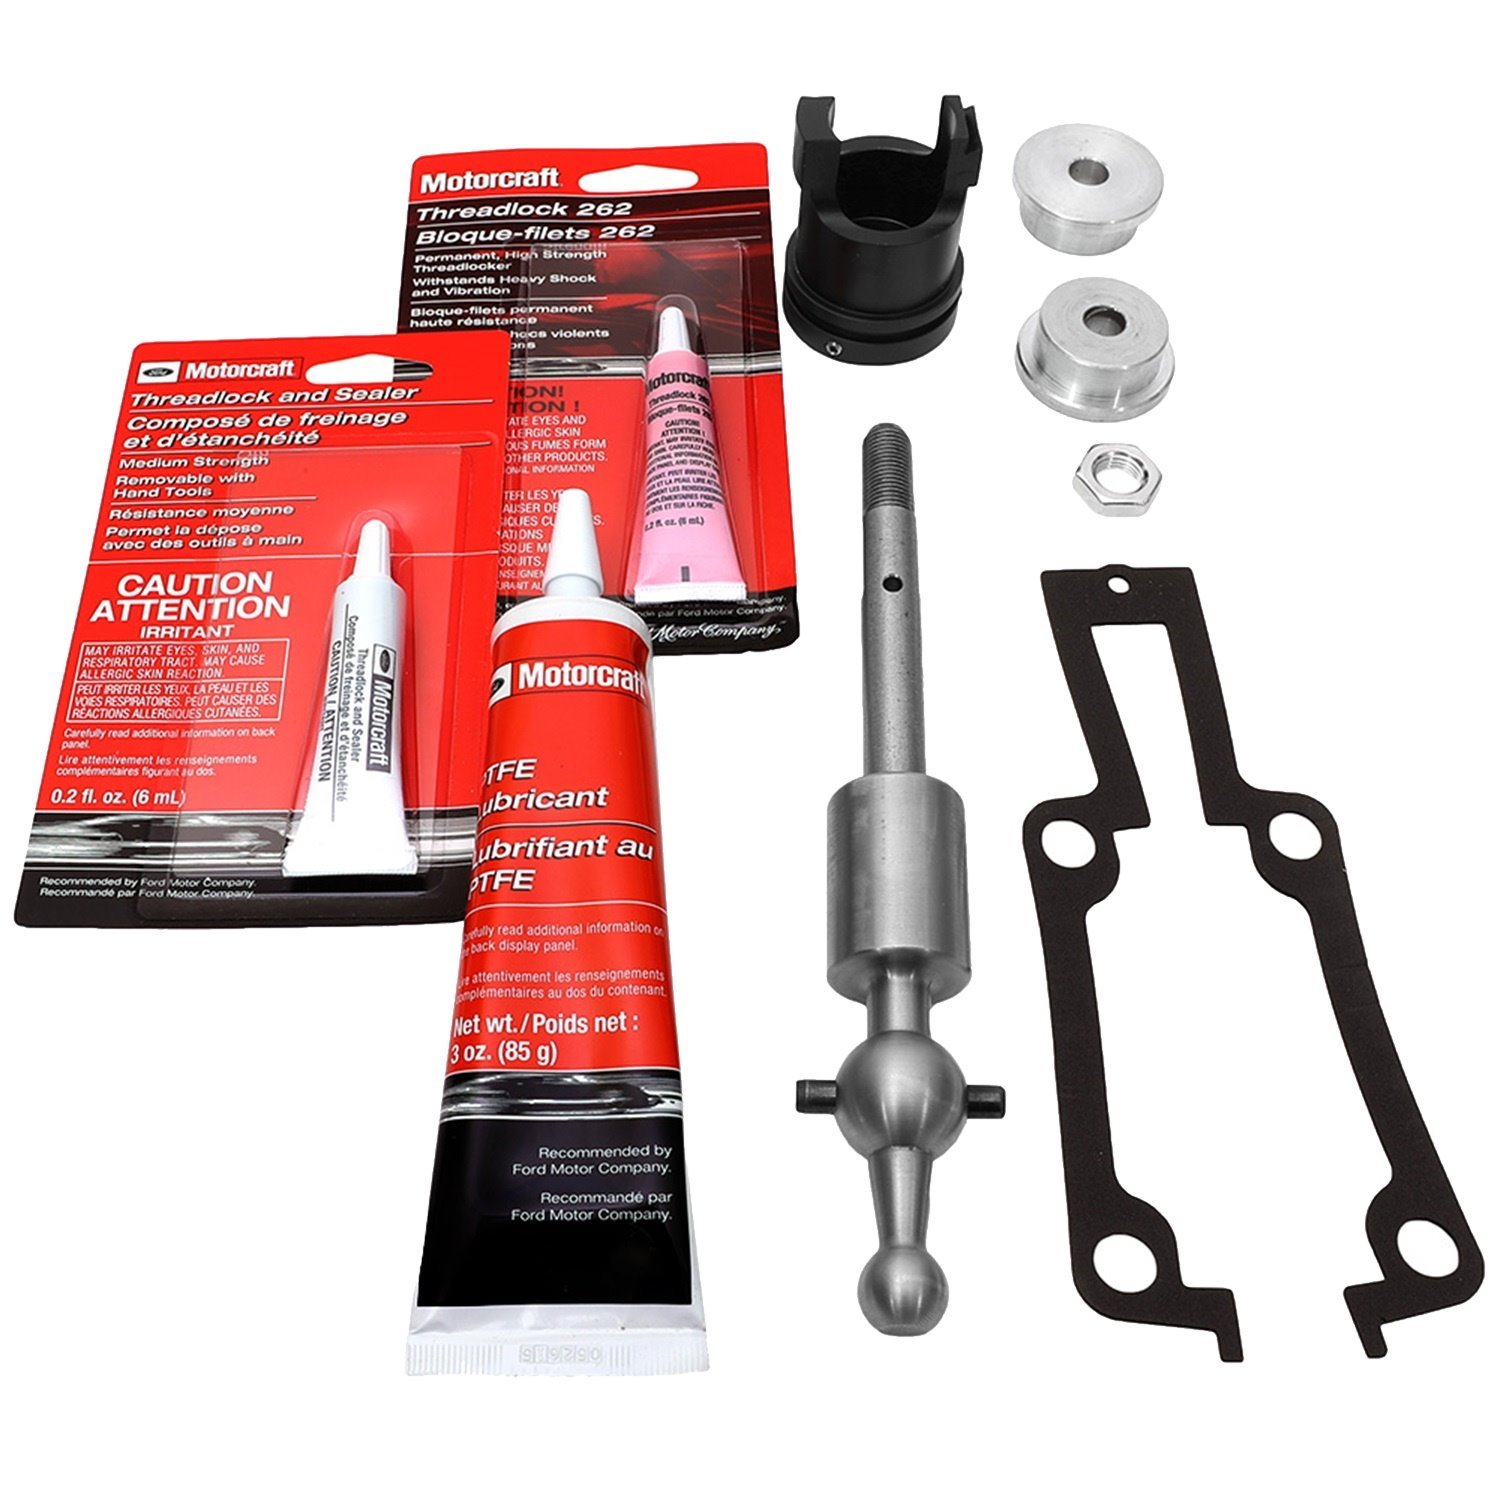 MUSTANG SHIFTER KIT - WIT